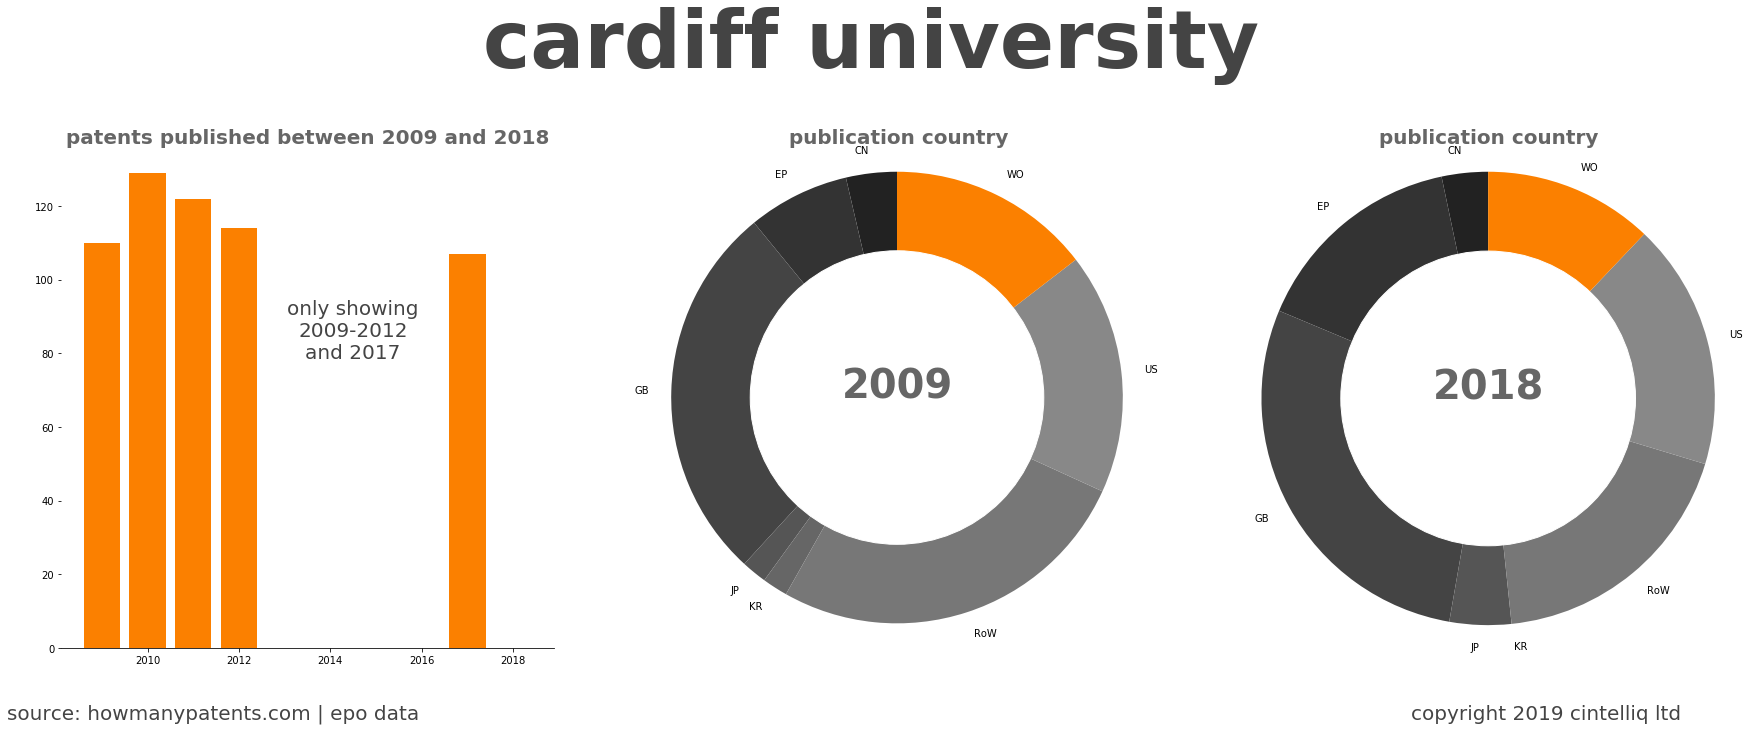 summary of patents for Cardiff University